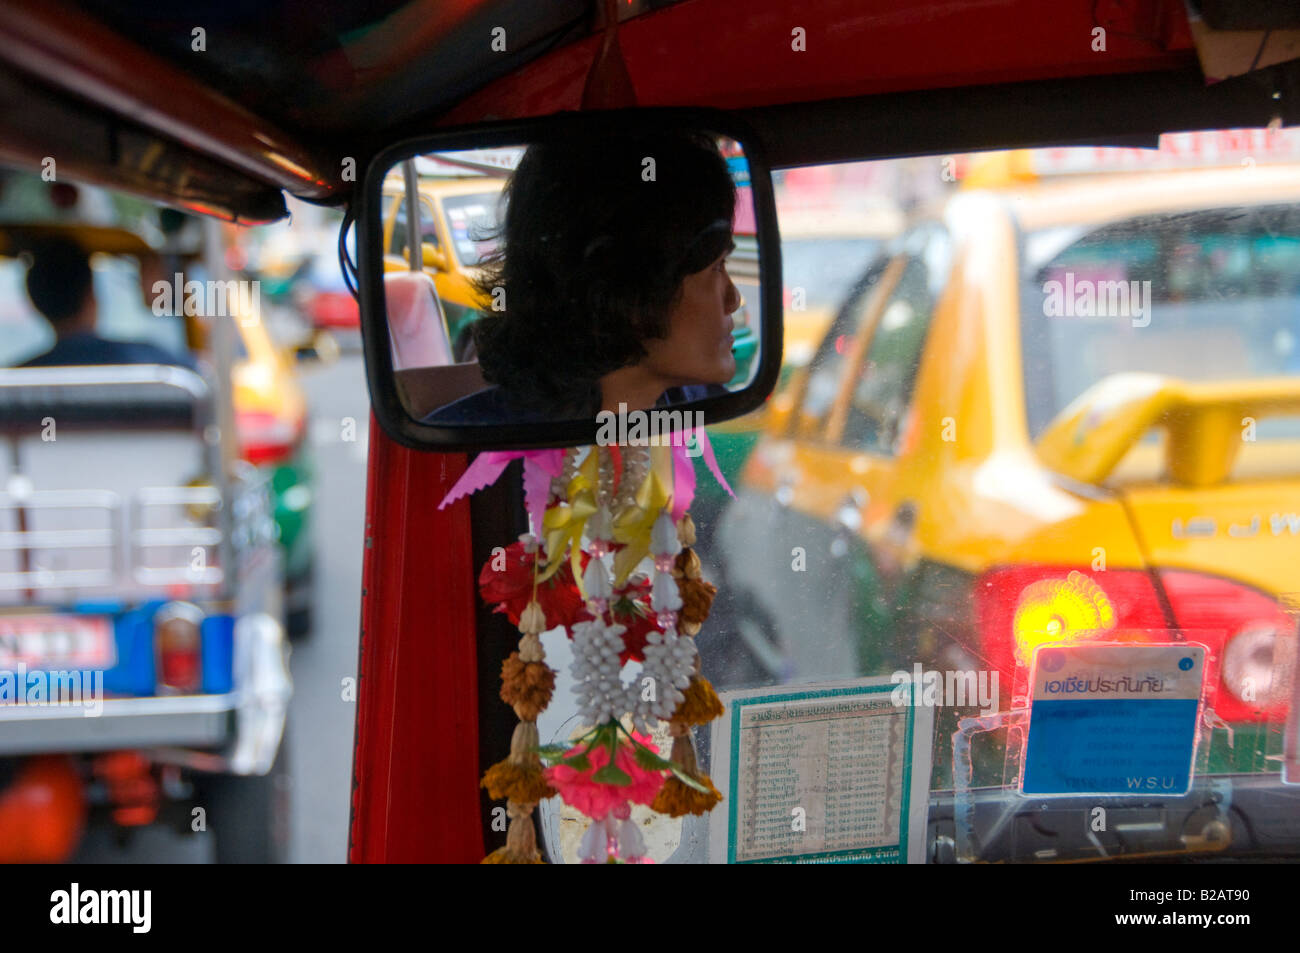 A driver is reflected in the rearview mirror of an Auto rickshaw taxi, commonly known as Tuk Tuk in Bangkok Thailand Stock Photo